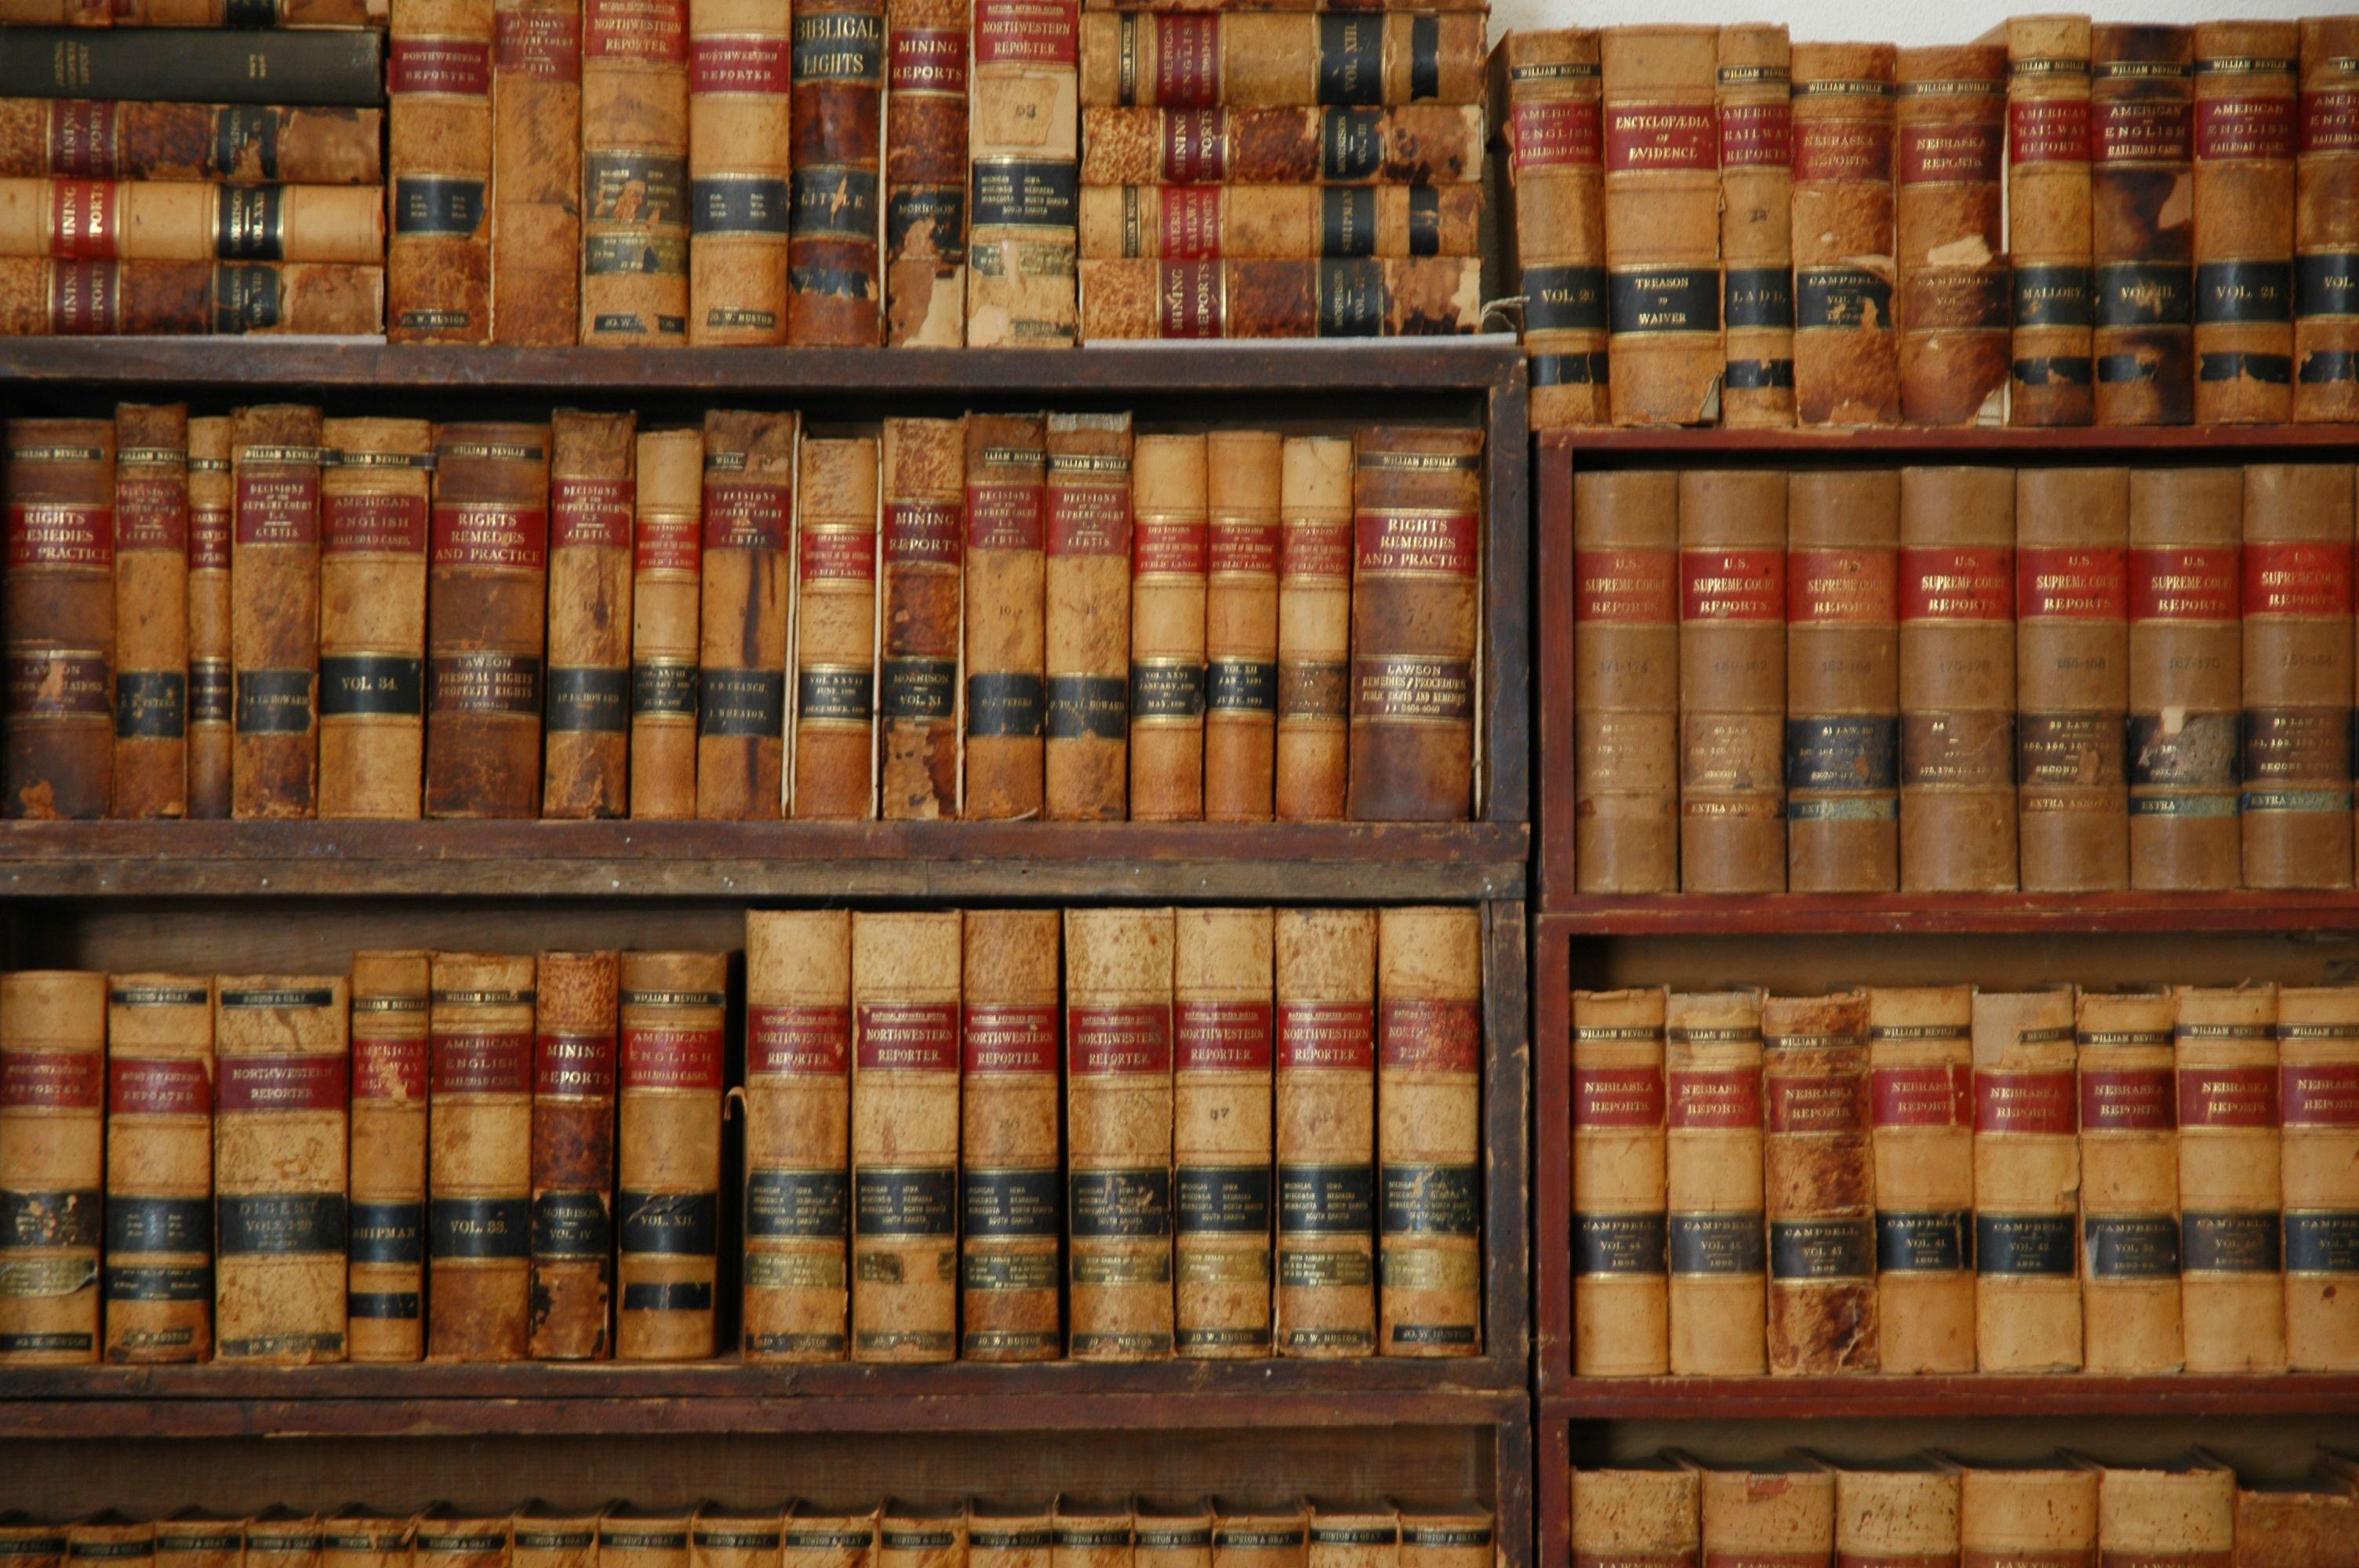 Law Books Wallpapers Top Free Law Books Backgrounds Wallpaperaccess